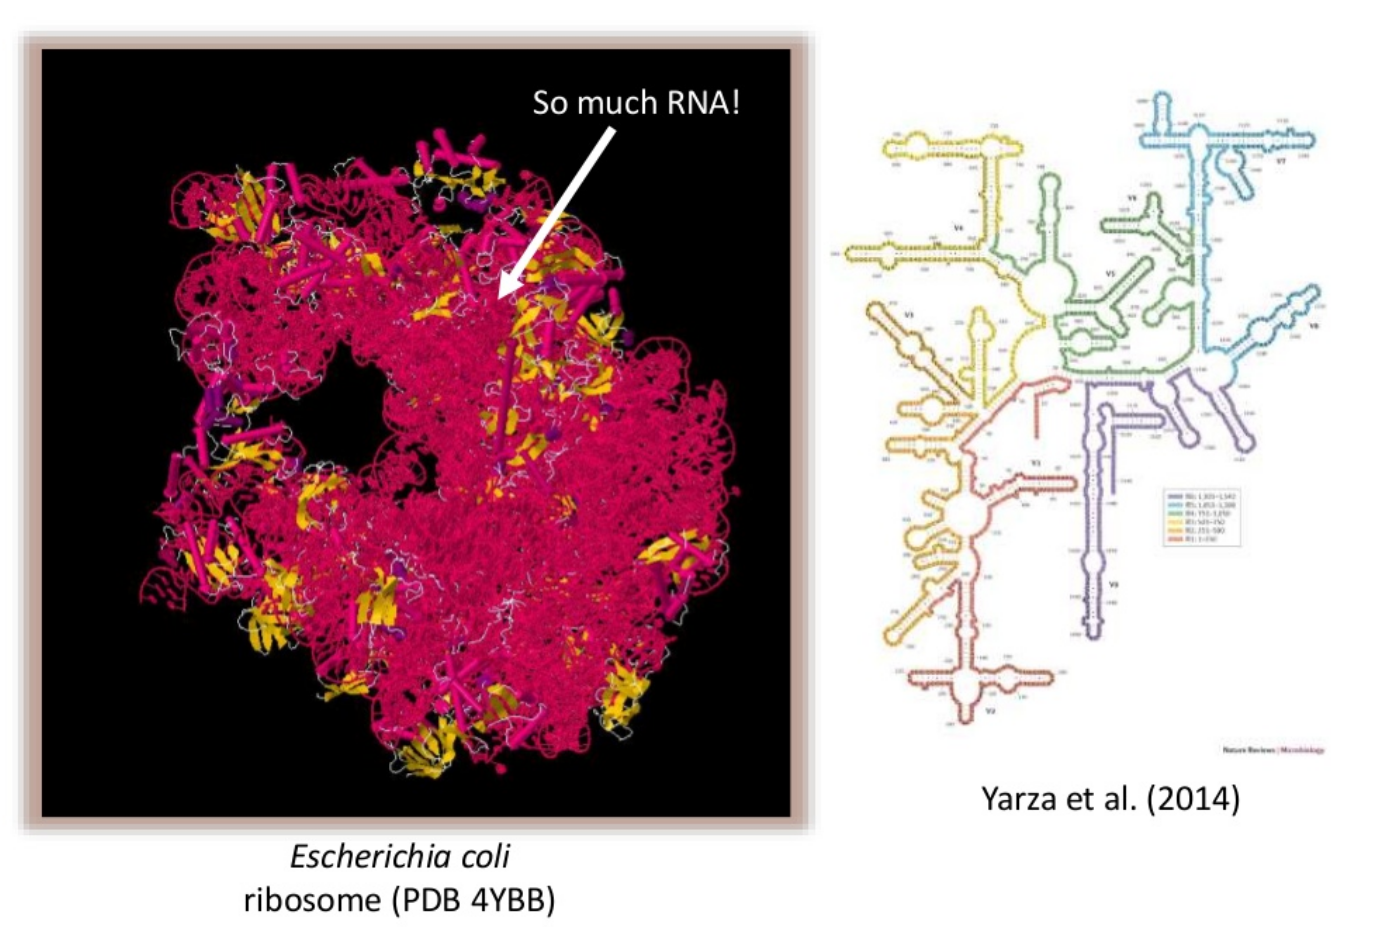 left is picture of e. coli ribosome with "so much rna" written, right is the RNA structure in a diagram